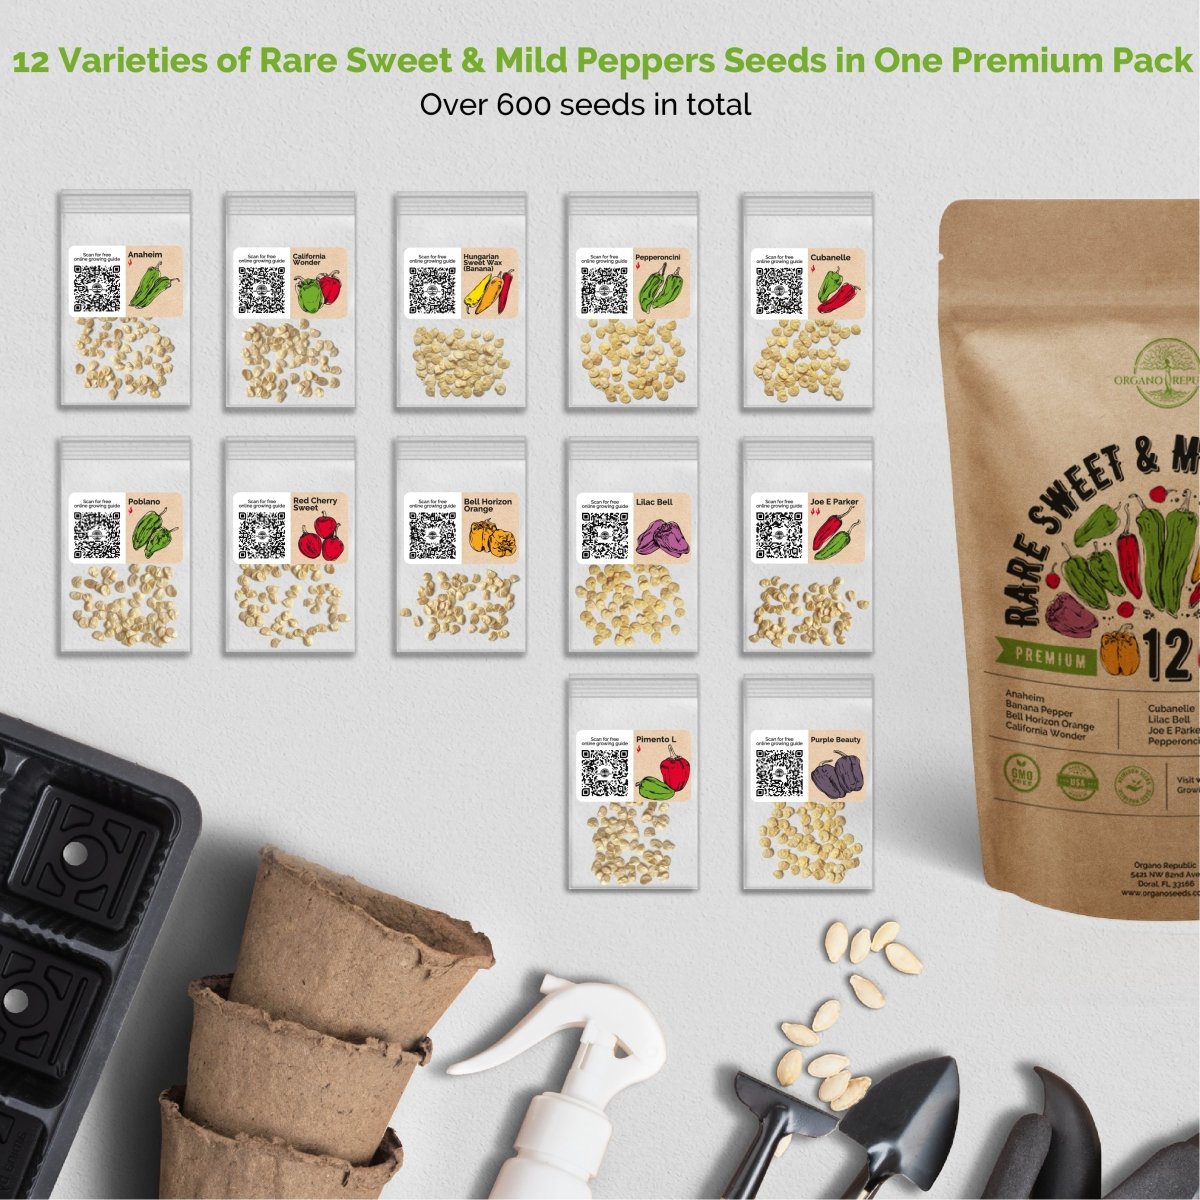 Broccoli Sprouting & Microgreens and 12 Rare Sweet & Mild Pepper Seeds Bundle Non-GMO Heirloom Seeds for Planting Indoor and Outdoor Over 130,600 Microgreen & Pepper Seeds in One Value Bundle - Organo Republic